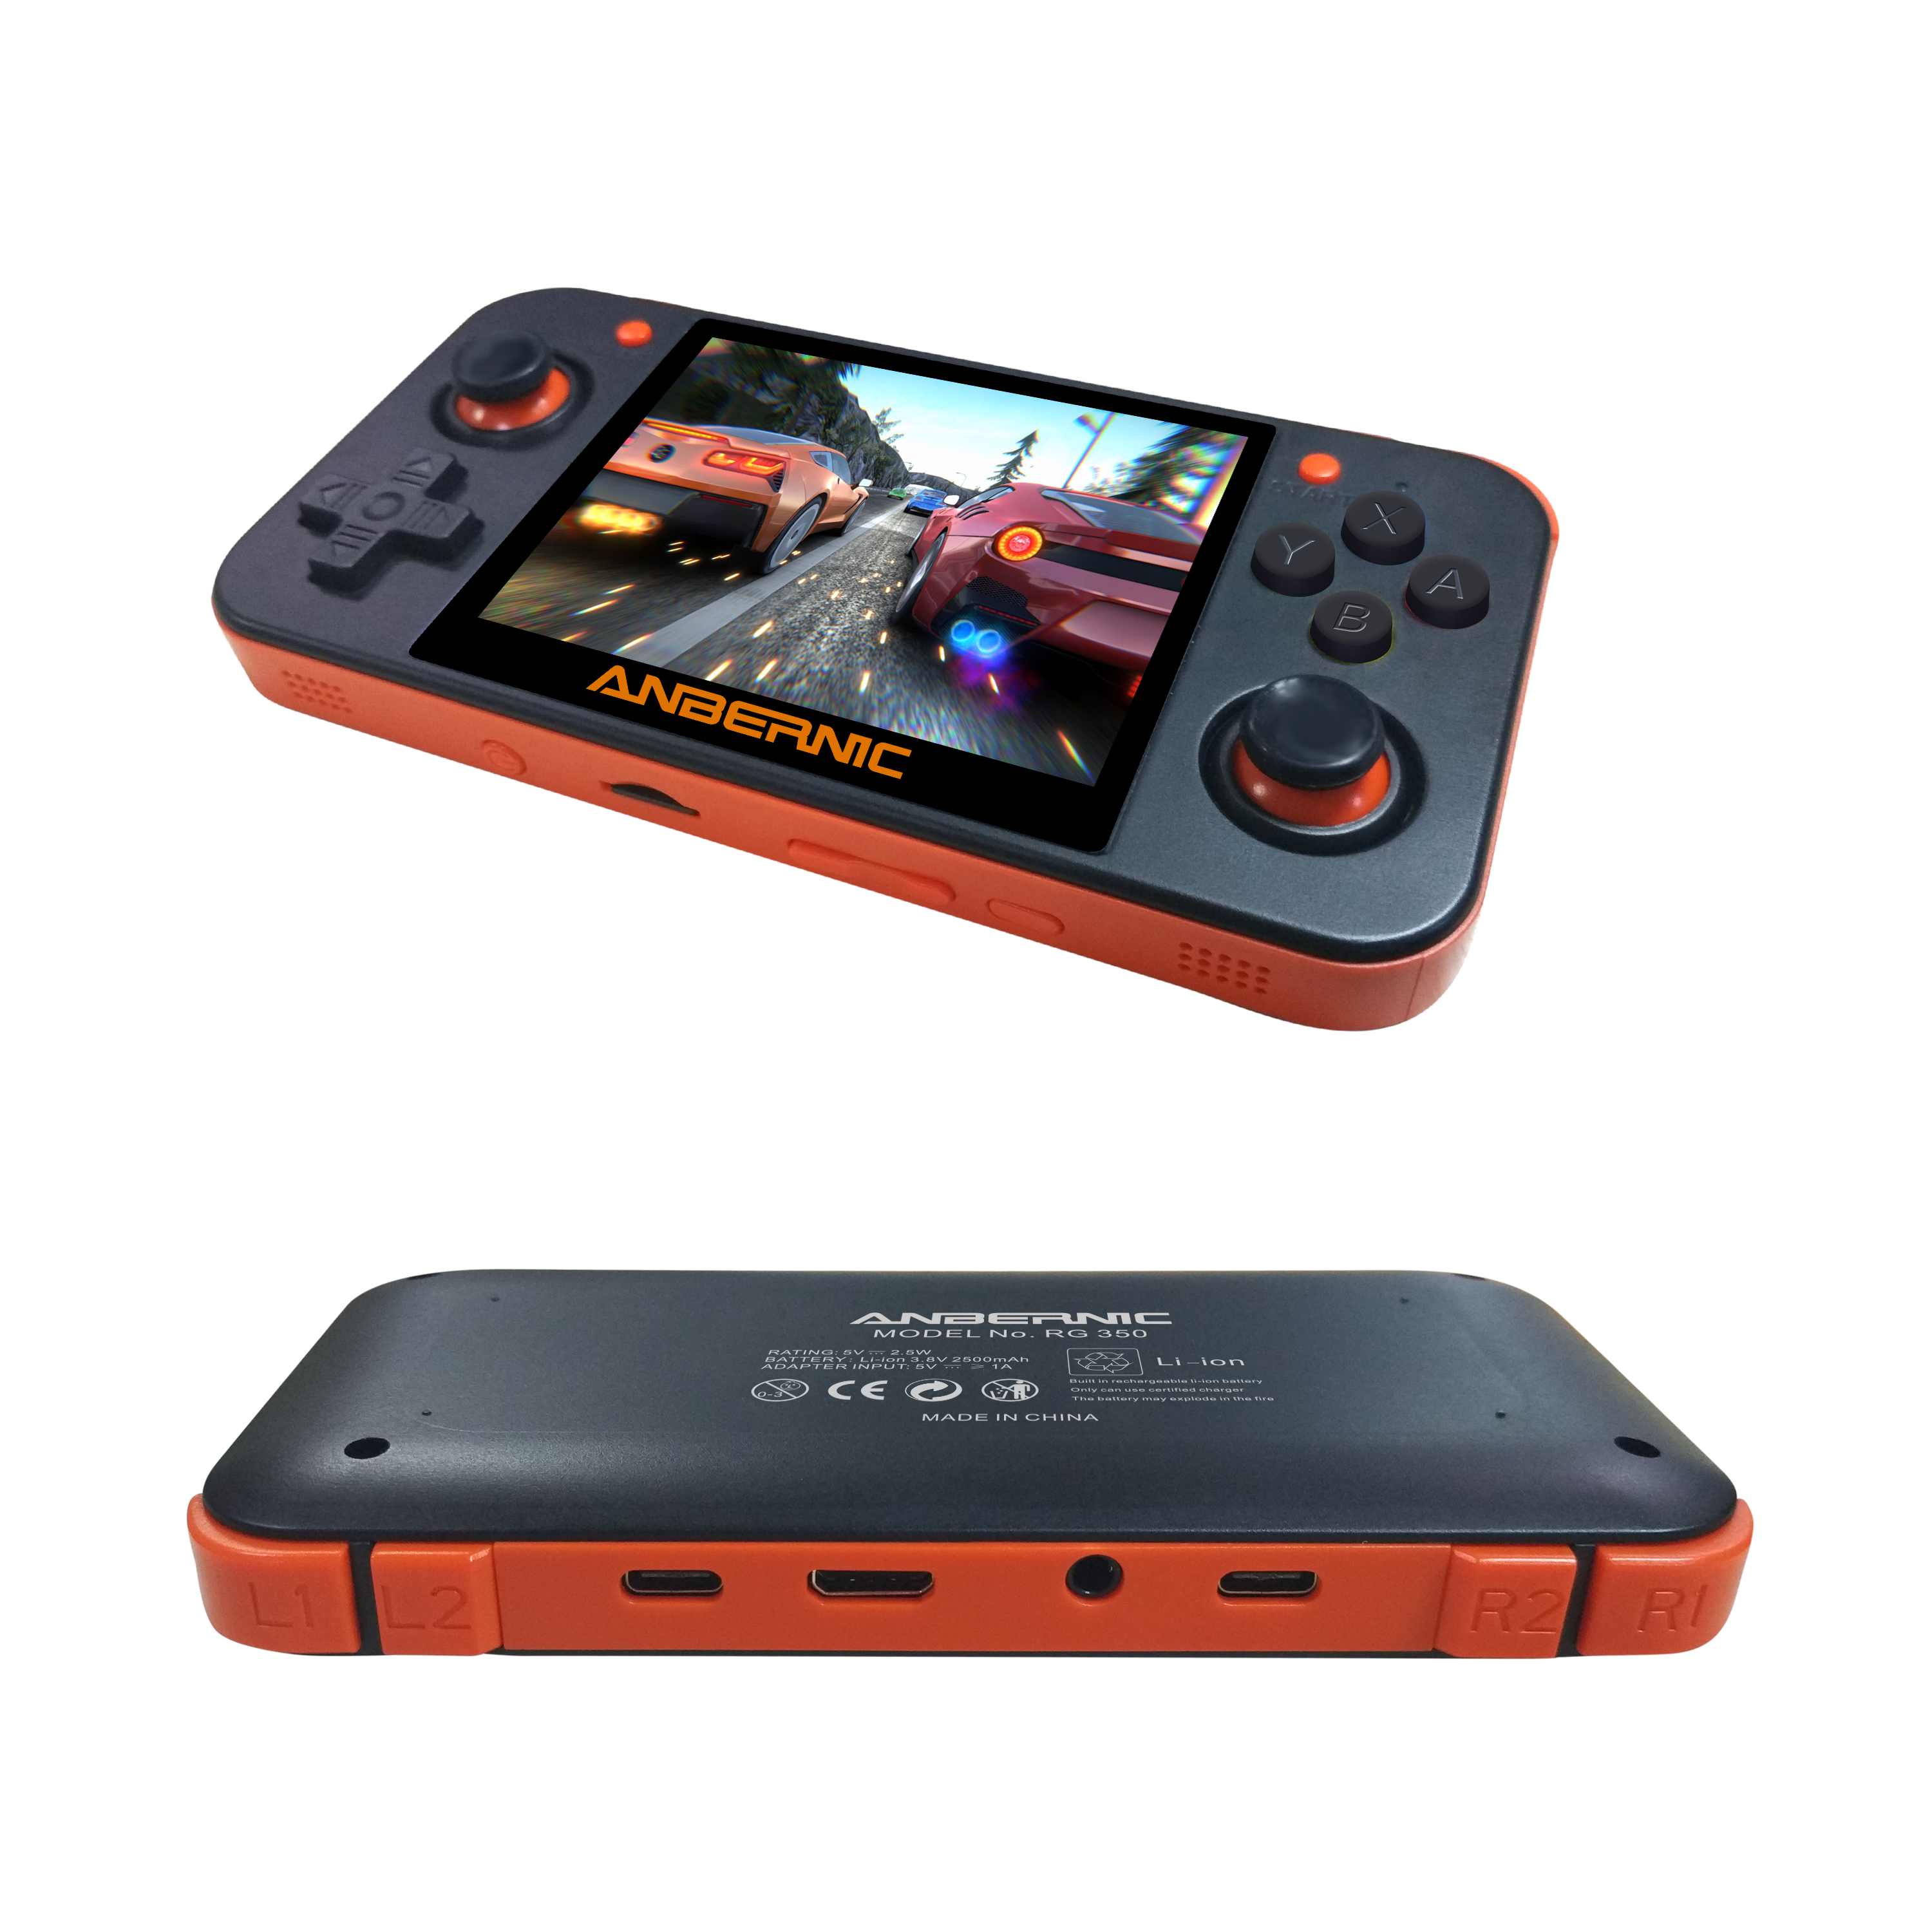 RG350 Handheld Game Console by Anbernic | DroiX Global